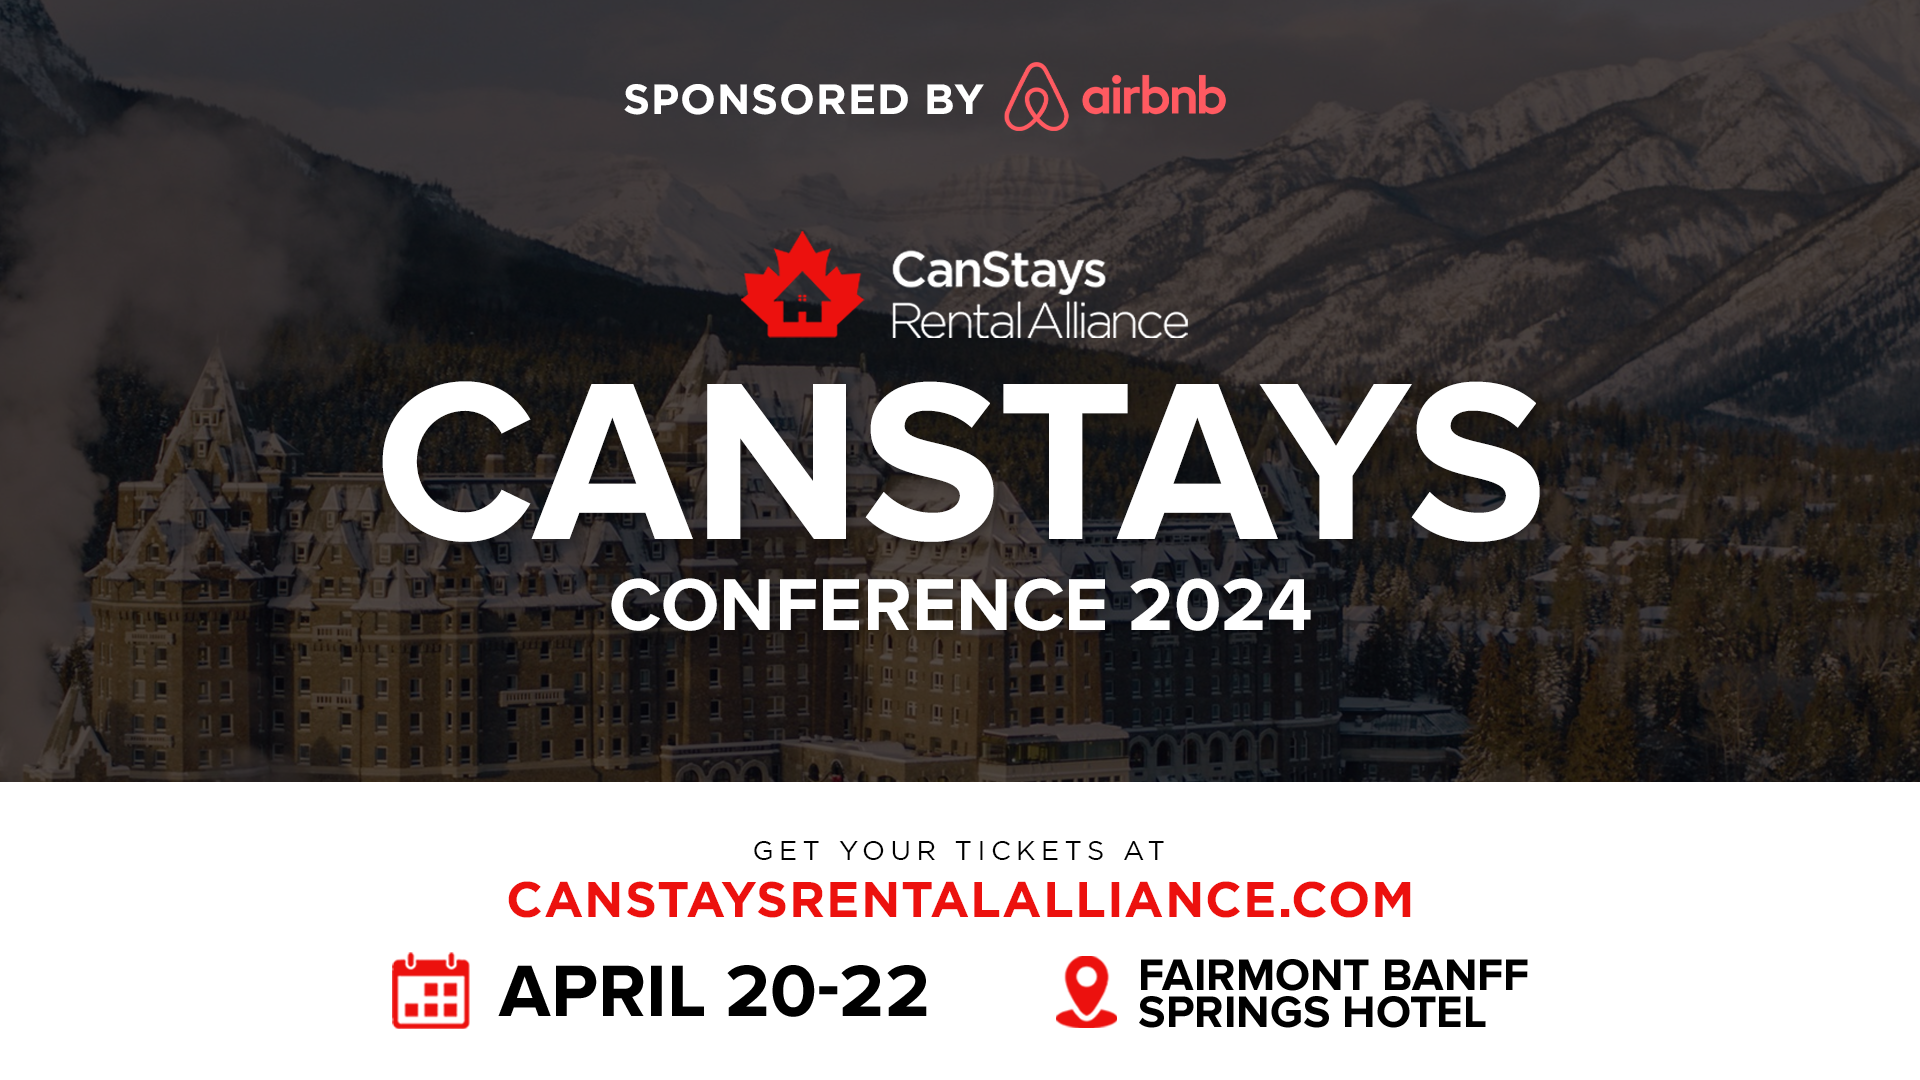 CanStays Conference 2024 by CanStays Rental Alliance